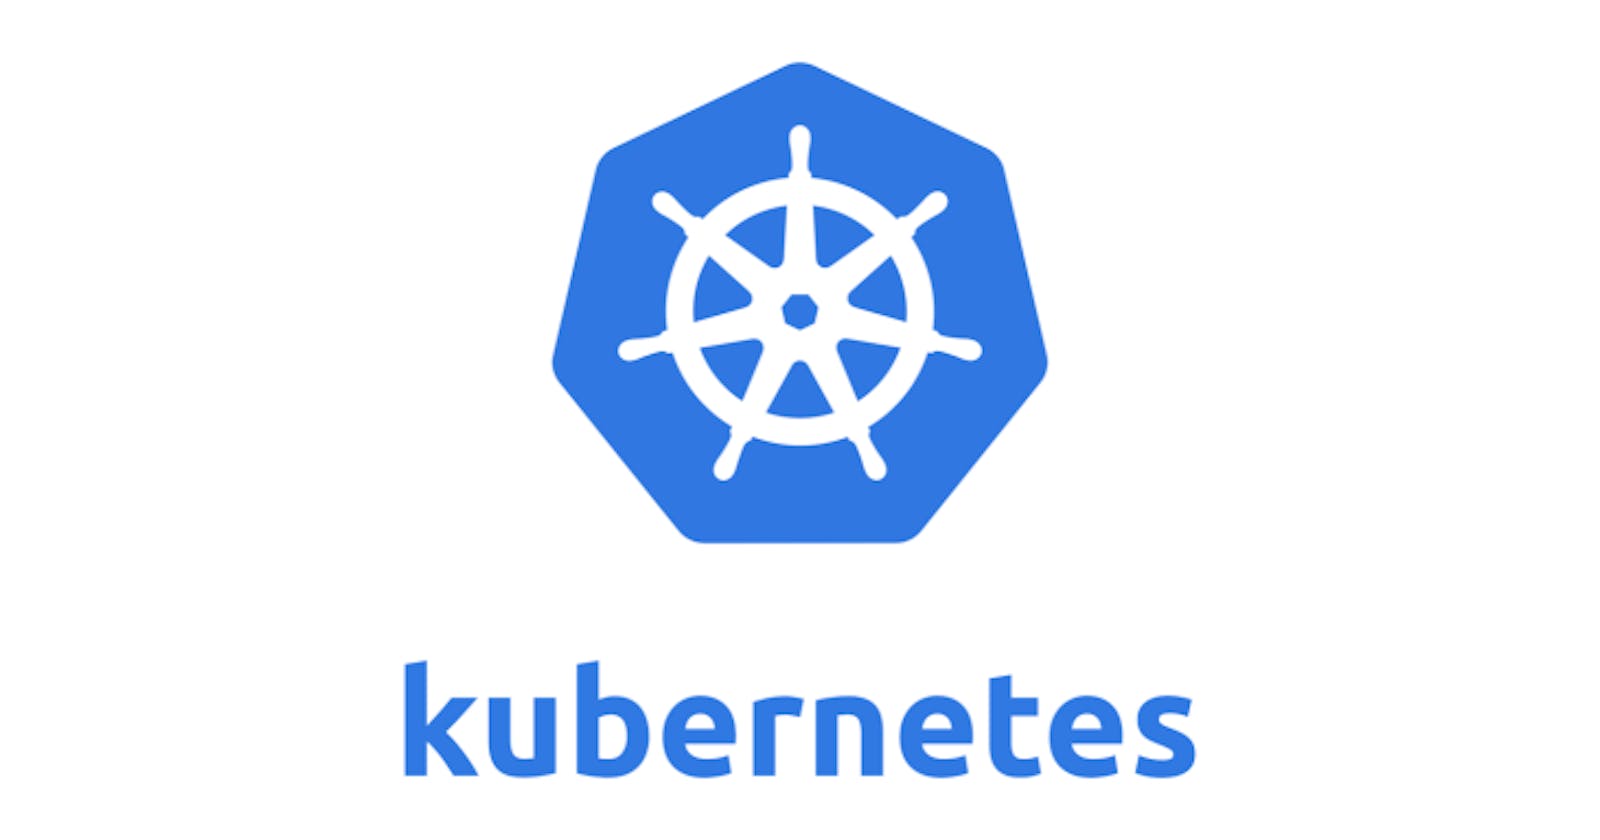 Getting Started With Kubernetes(k8s)